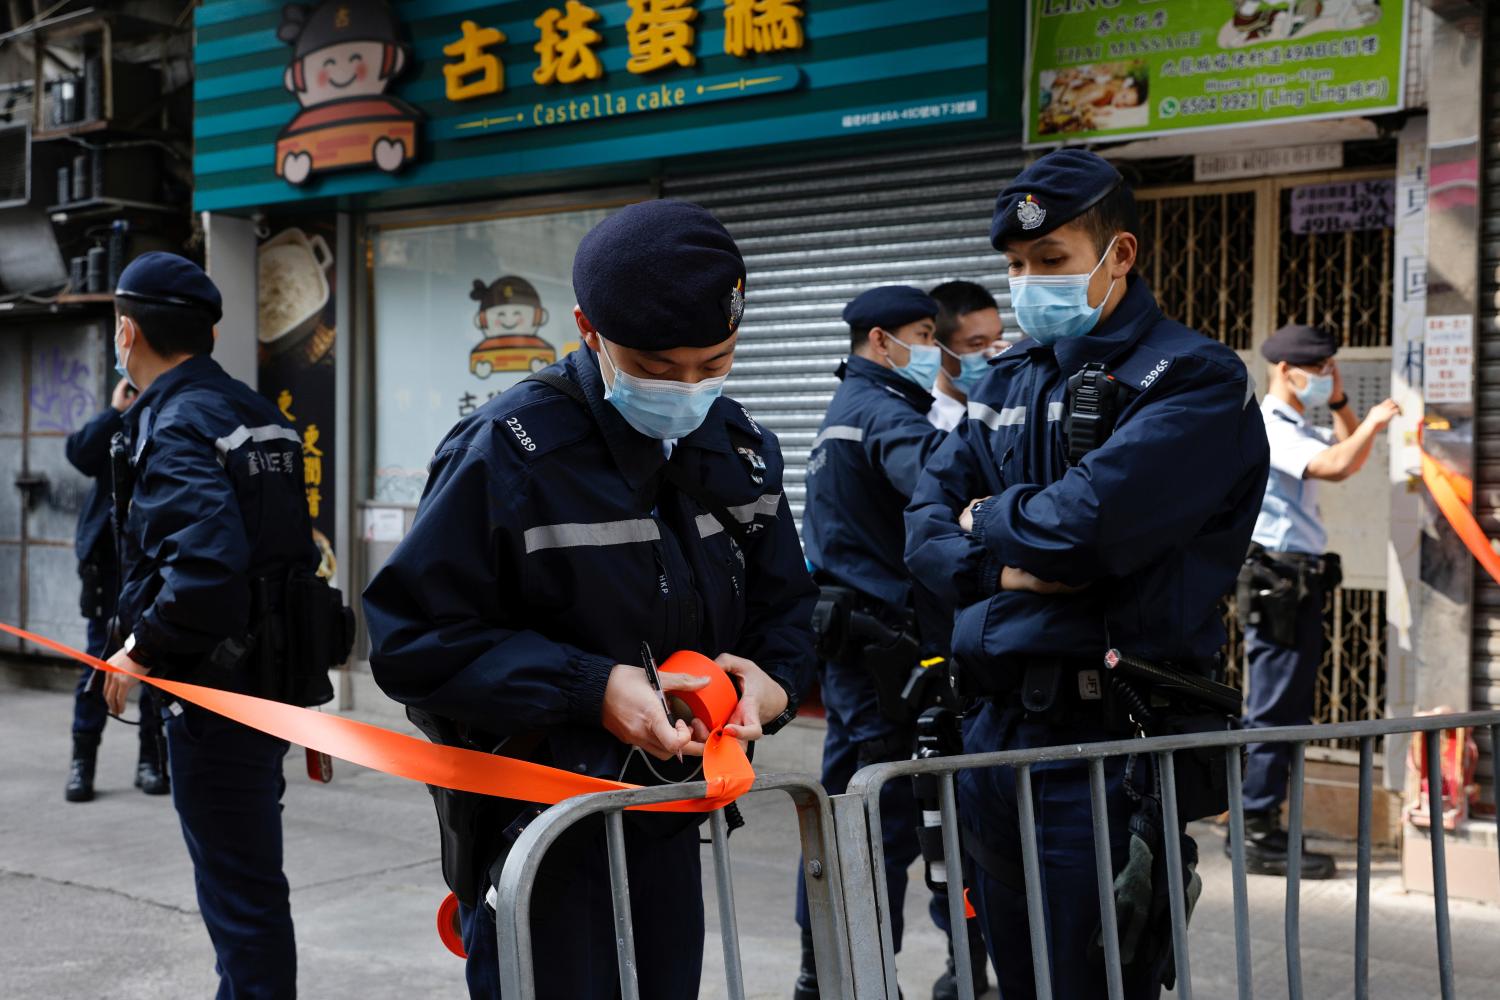 Police are seen outside the office of Daniel Wong Kwok-tung, a lawyer who tried to help the 12 people detained in mainland China, in Hong Kong, China January 14, 2021. REUTERS/Tyrone Siu